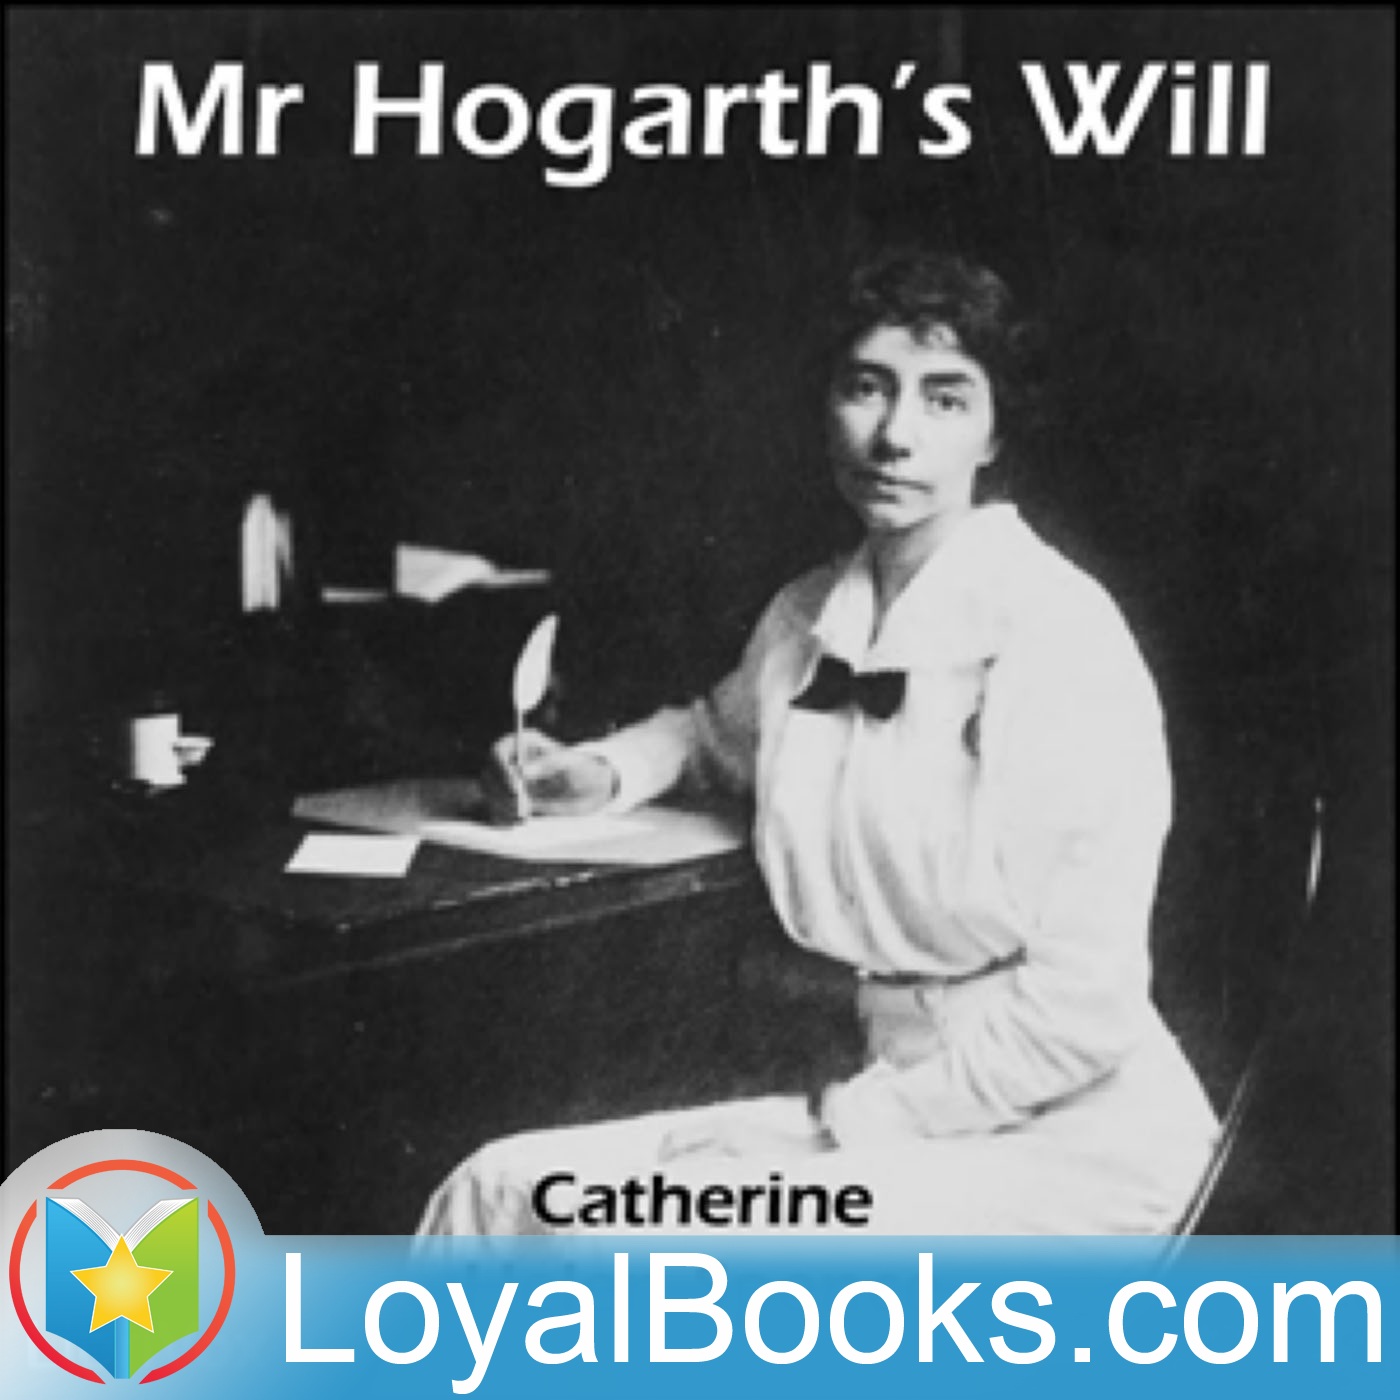 Mr. Hogarth's Will by Catherine Helen Spence